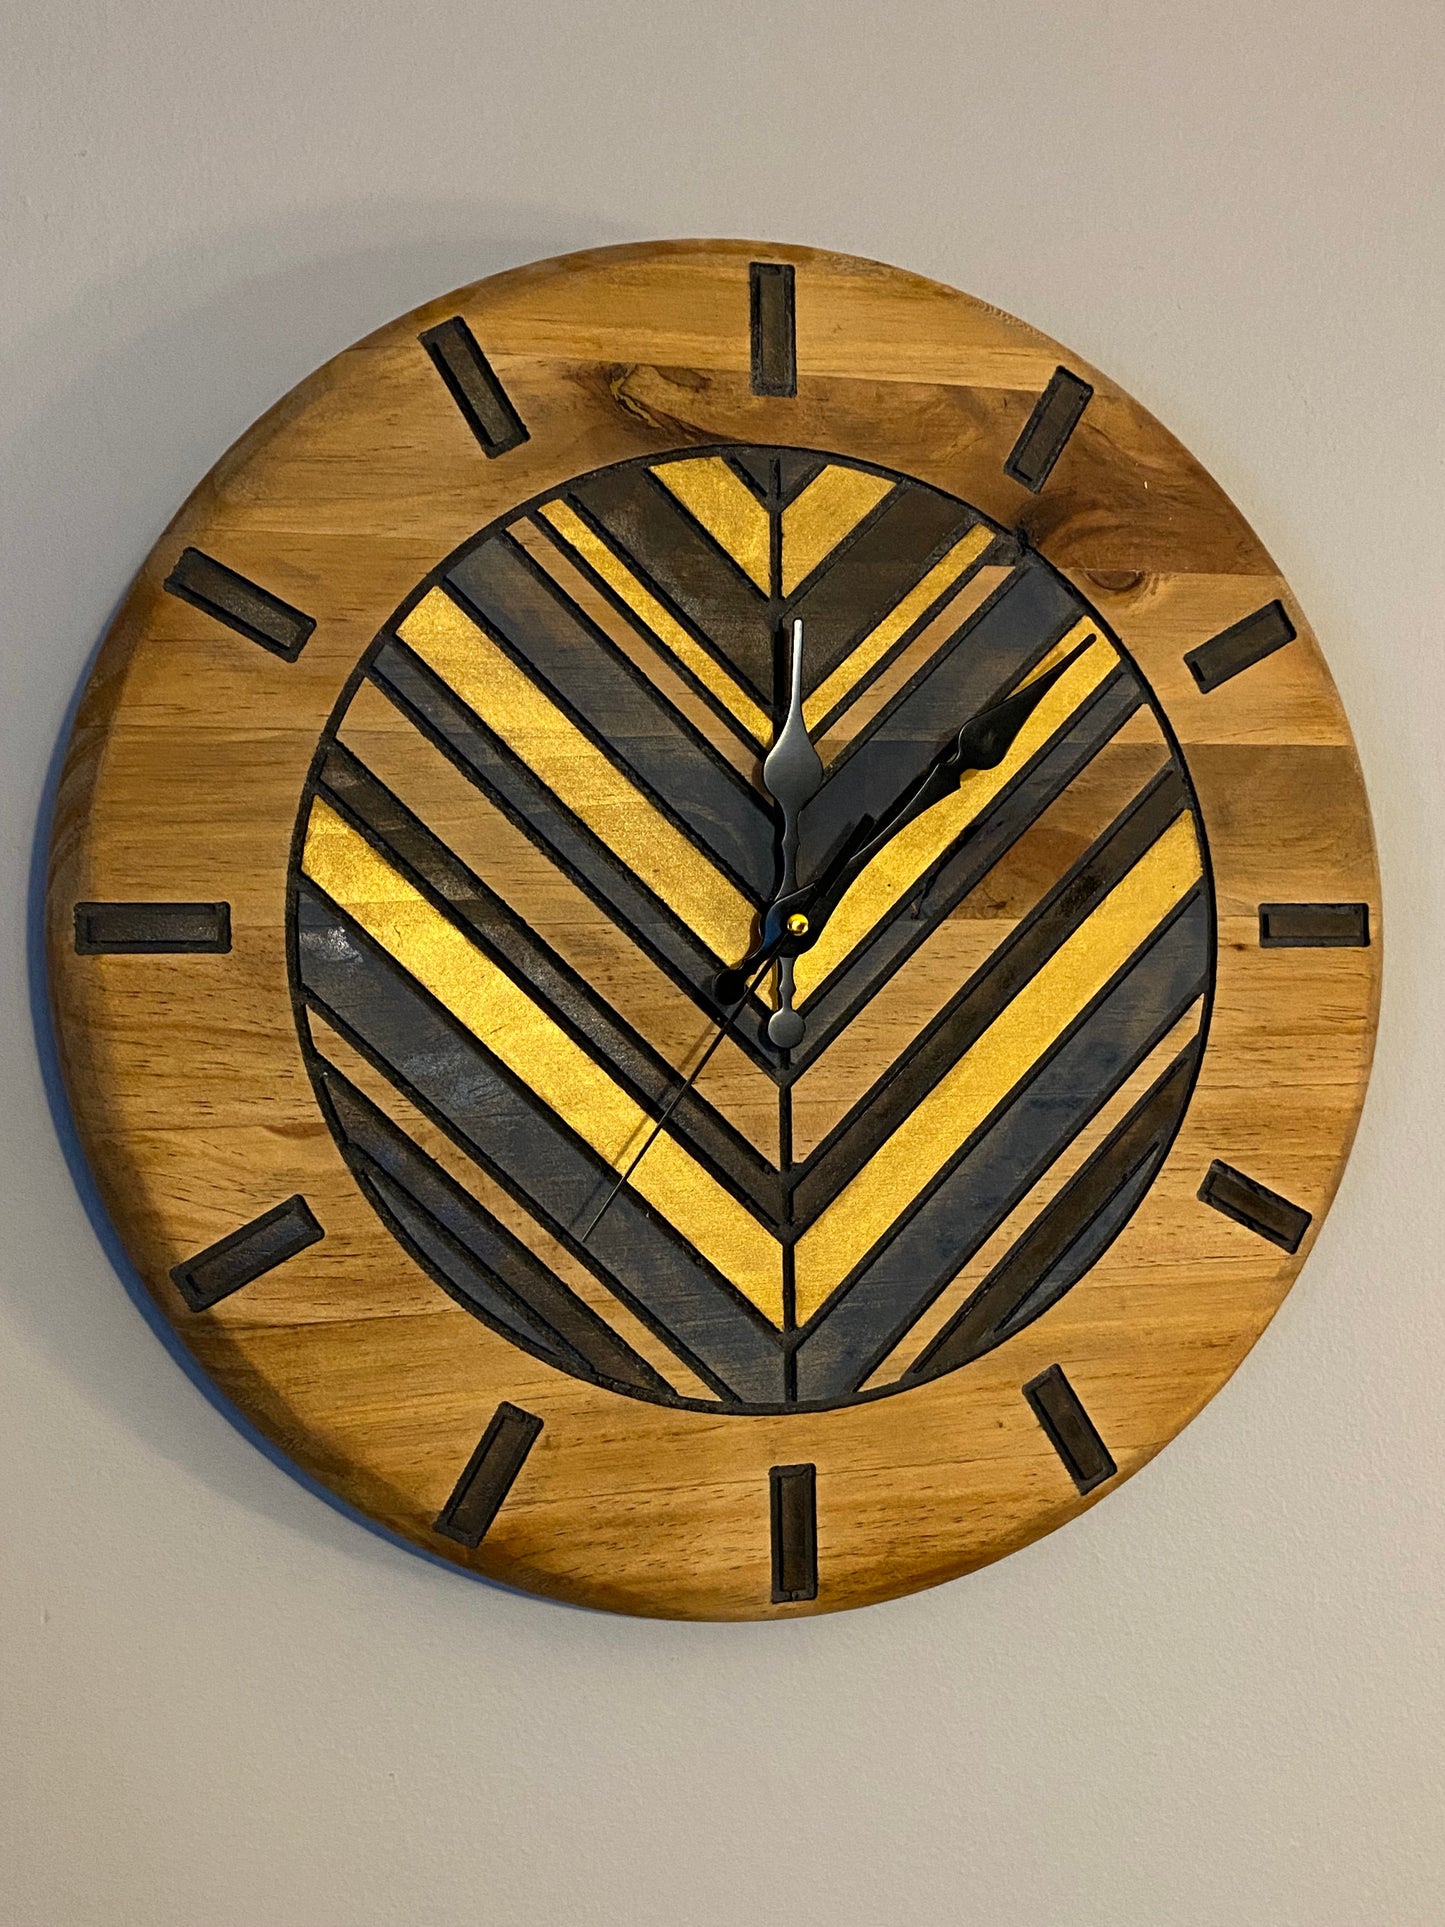 Hand Crafted Wood Quilt Pattern Clock